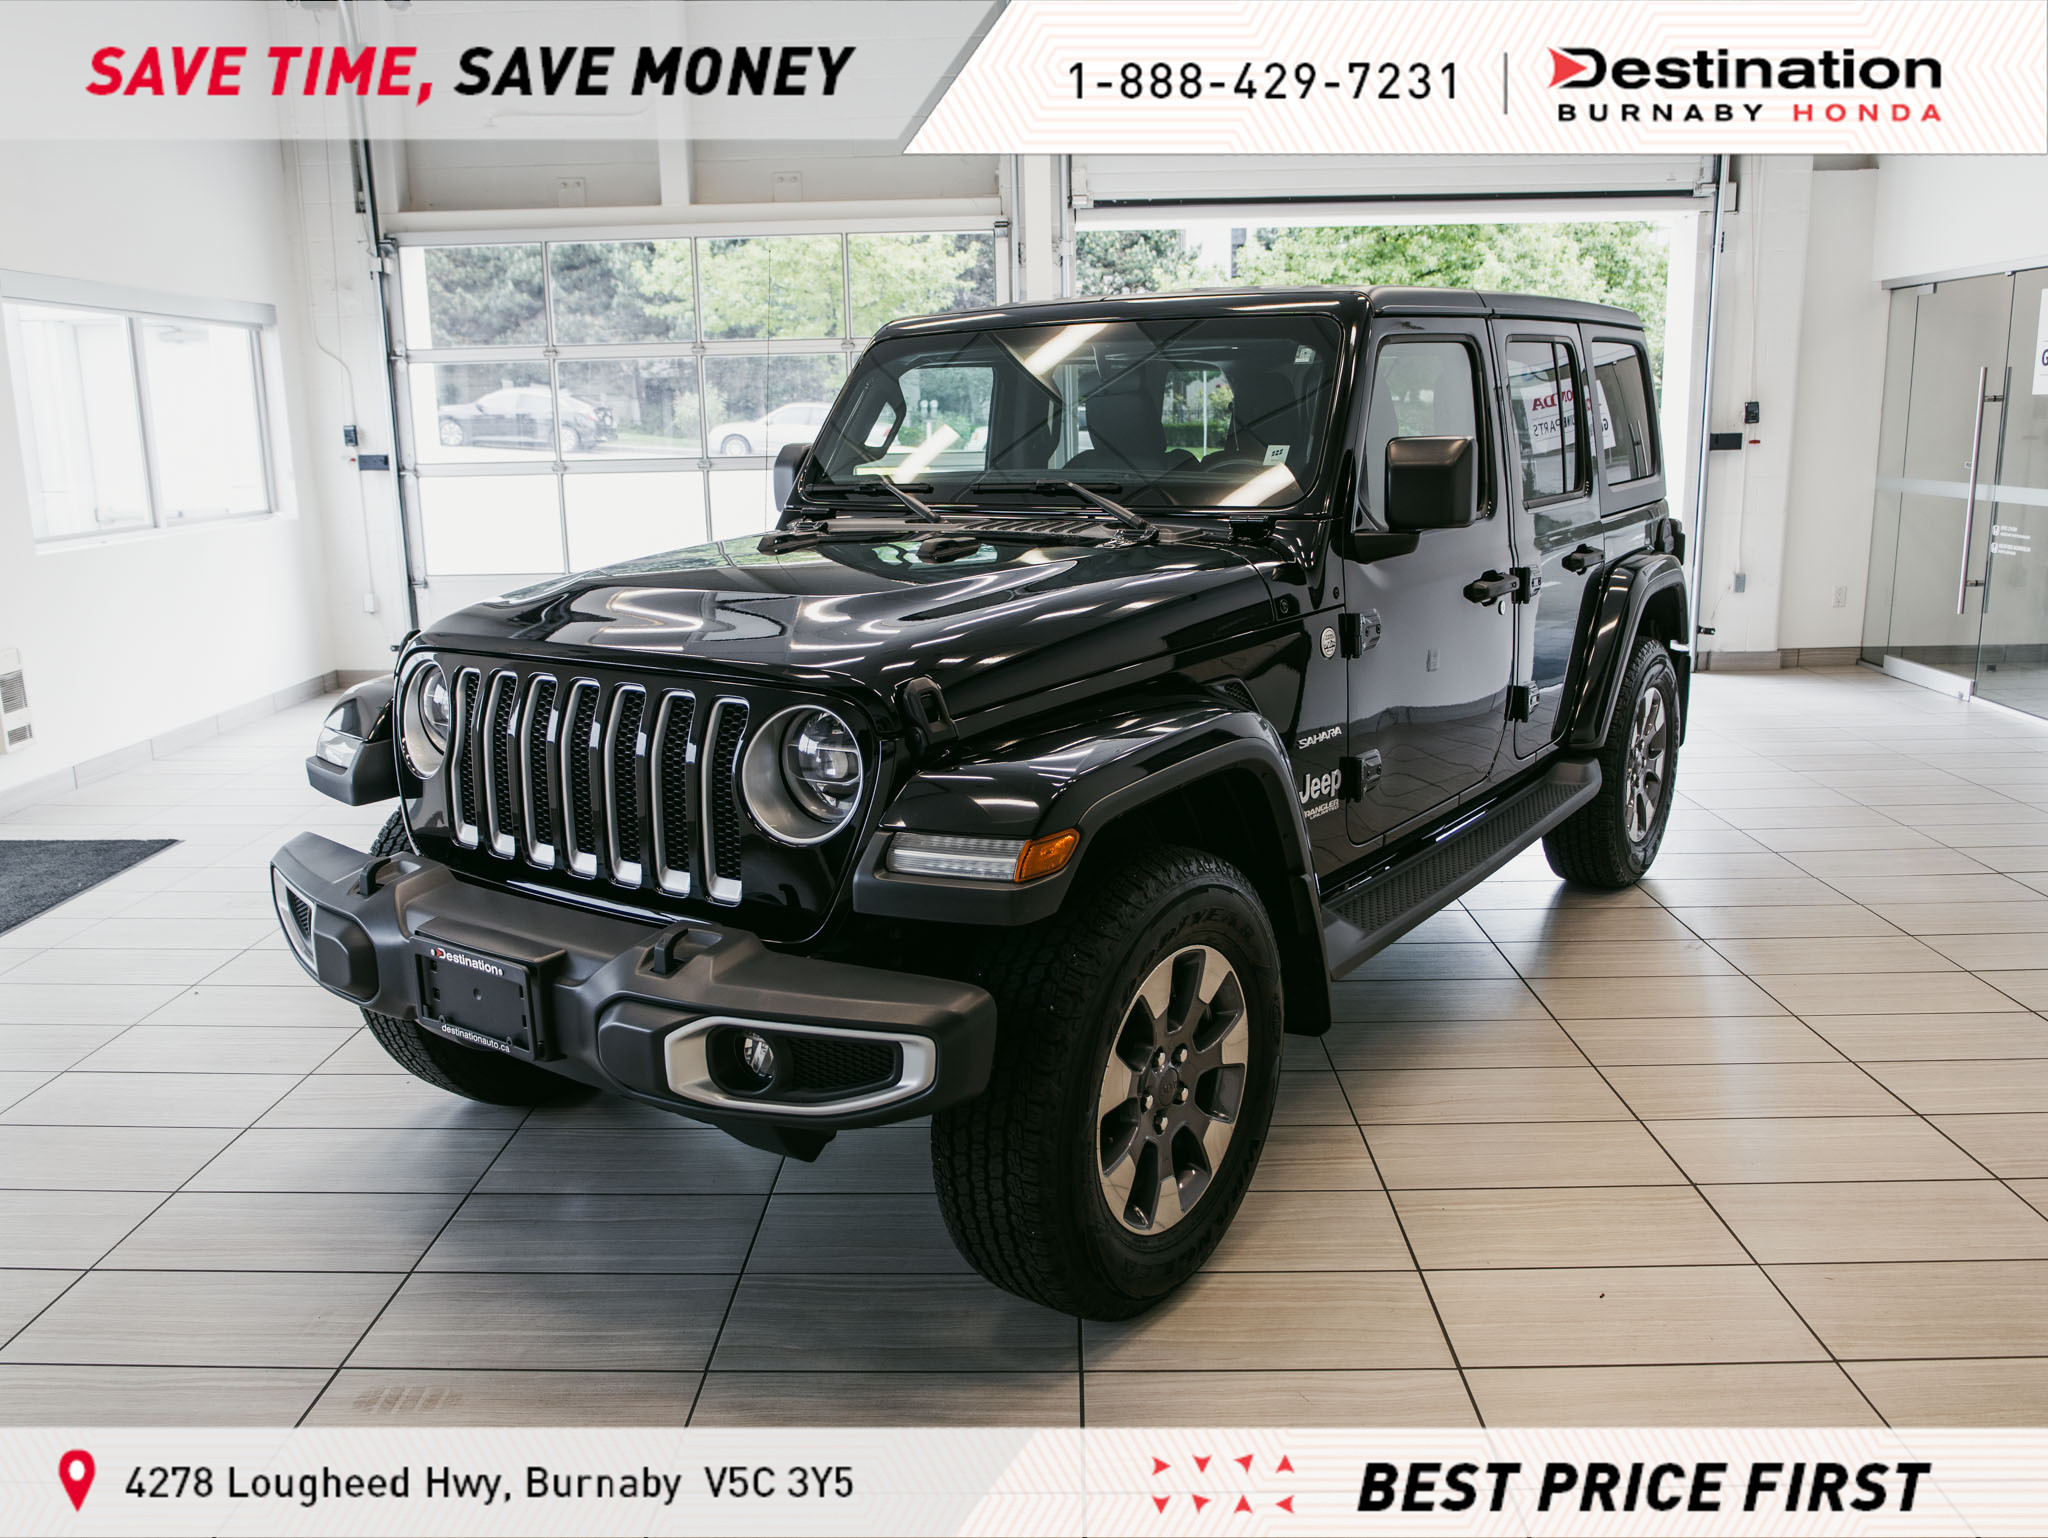 2019 Jeep WRANGLER UNLIMITED Sahara 4x4 - OFFROAD READY - RUGGED!